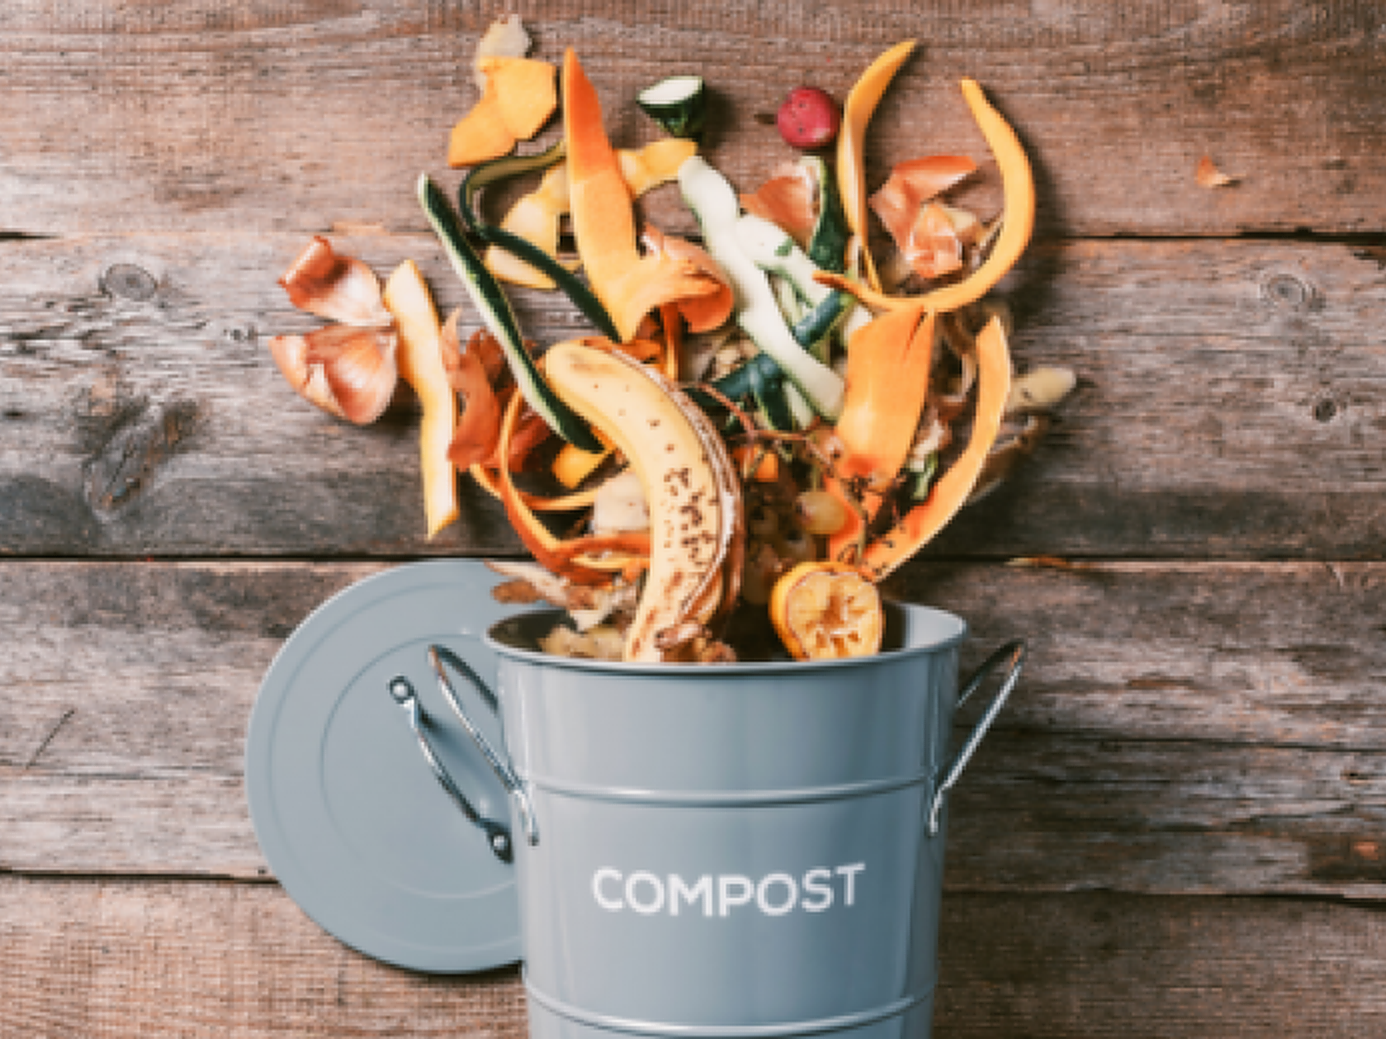 materials for composting